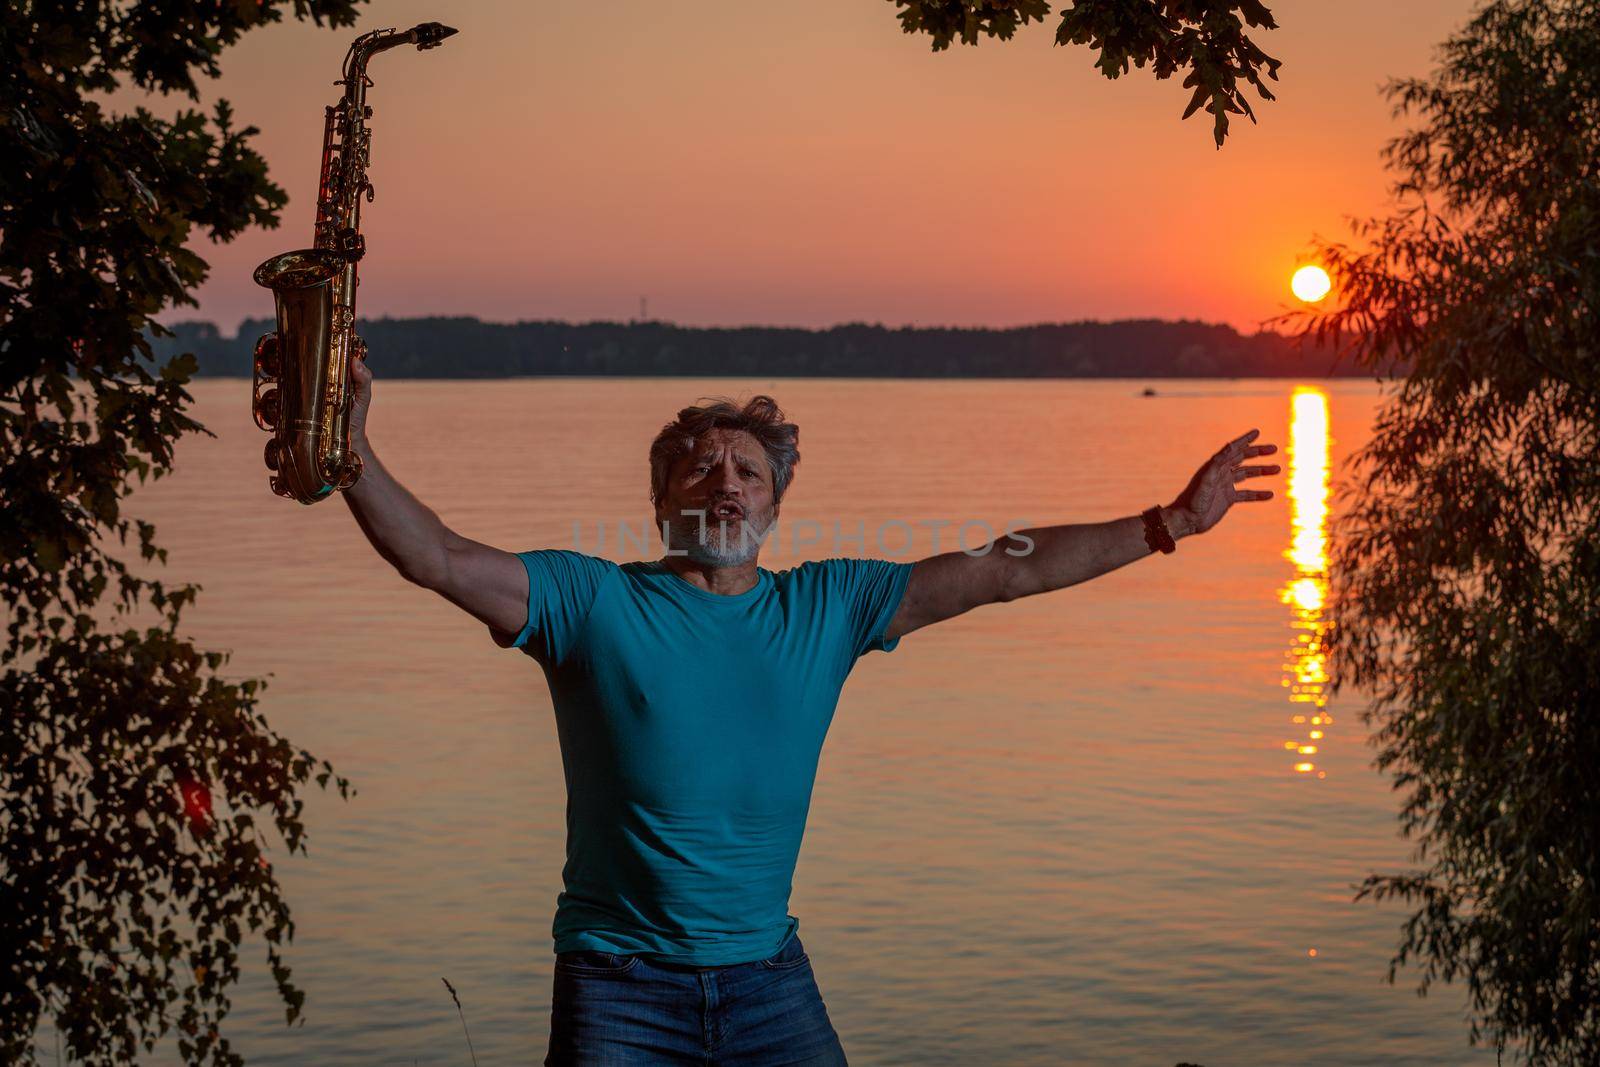 An adult man plays the saxophone at sunset by the river in the evening by Yurich32